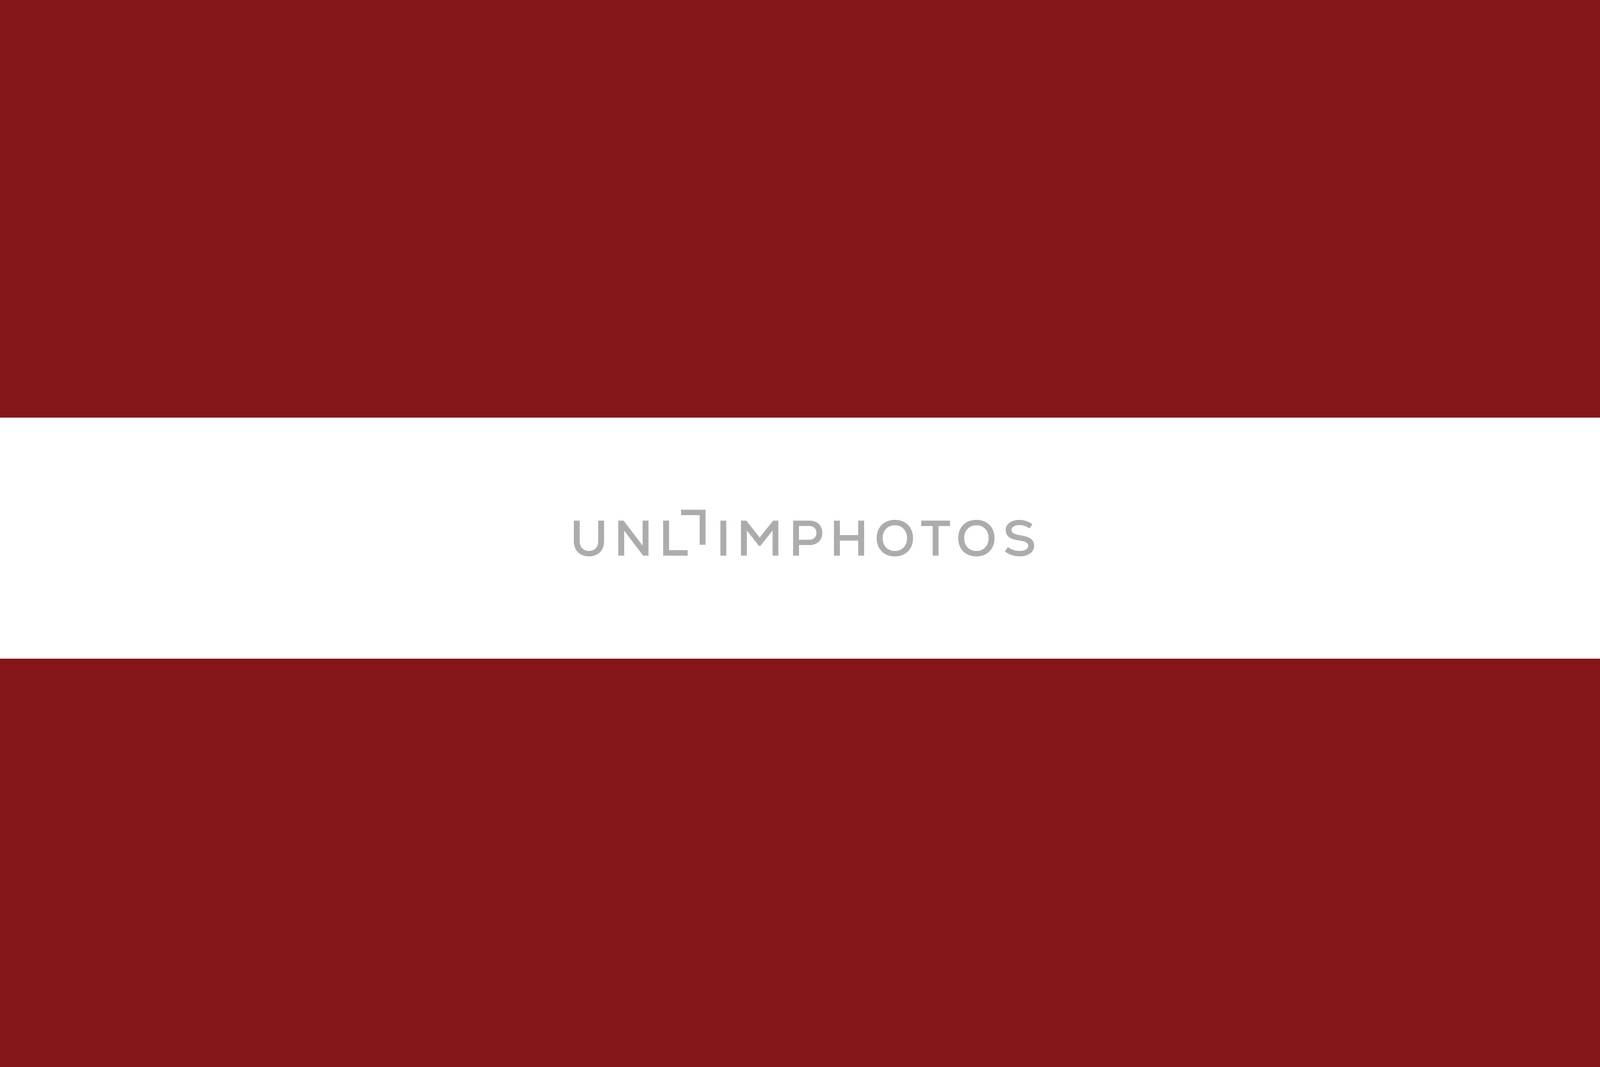 Illustrated Drawing of the flag of Latvia by DragonEyeMedia